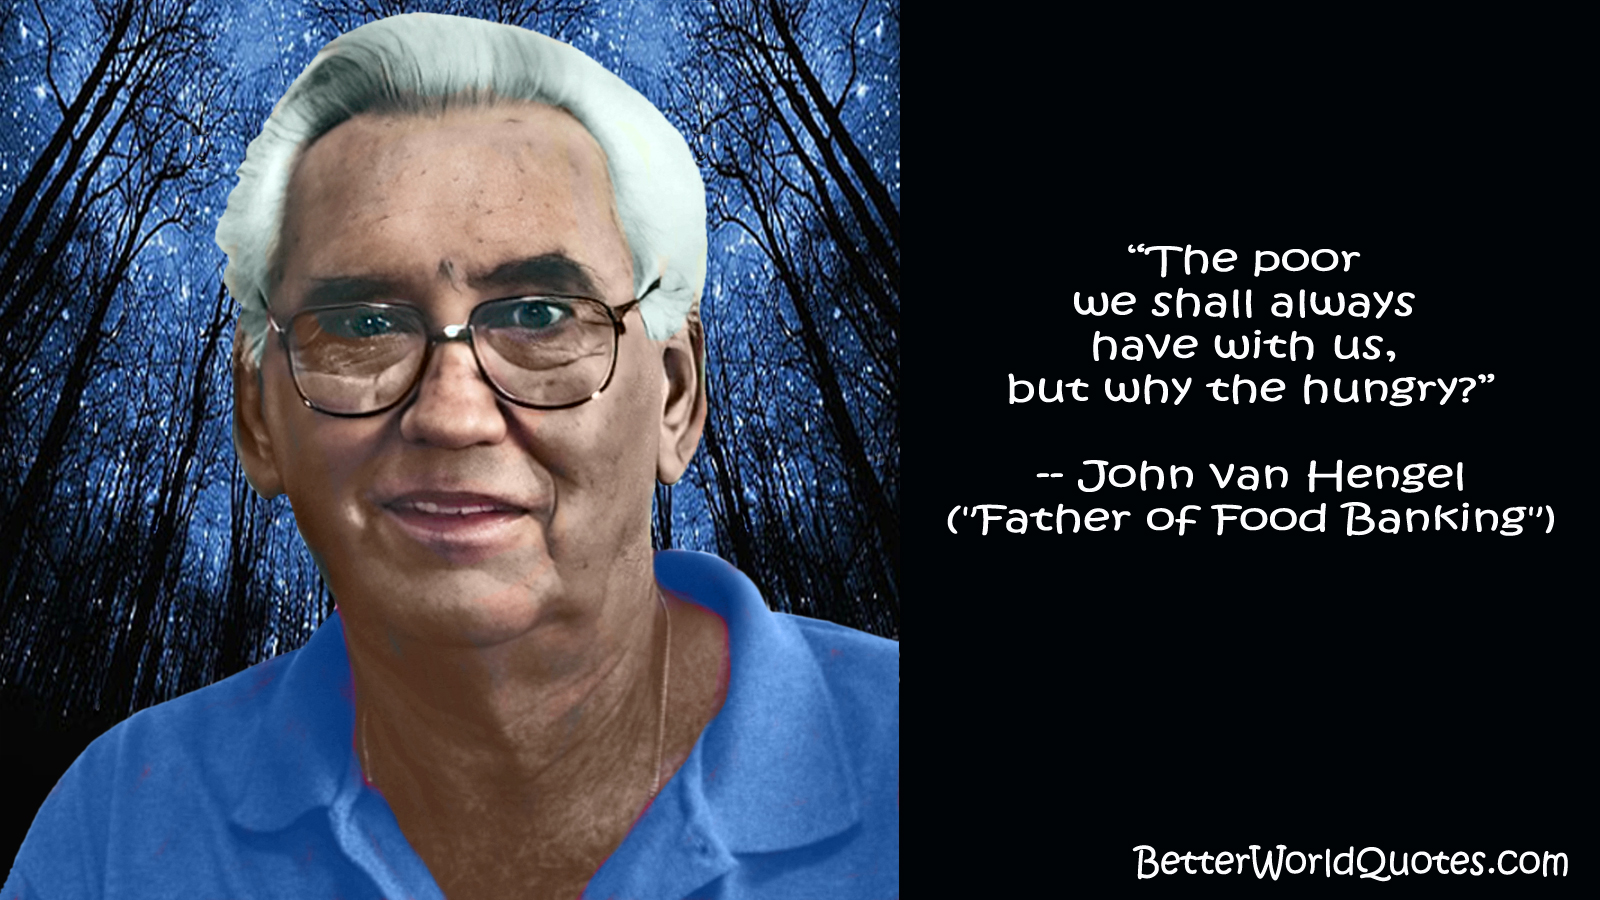 John van Hengel: The poor we shall always  have with us, but why the hungry?